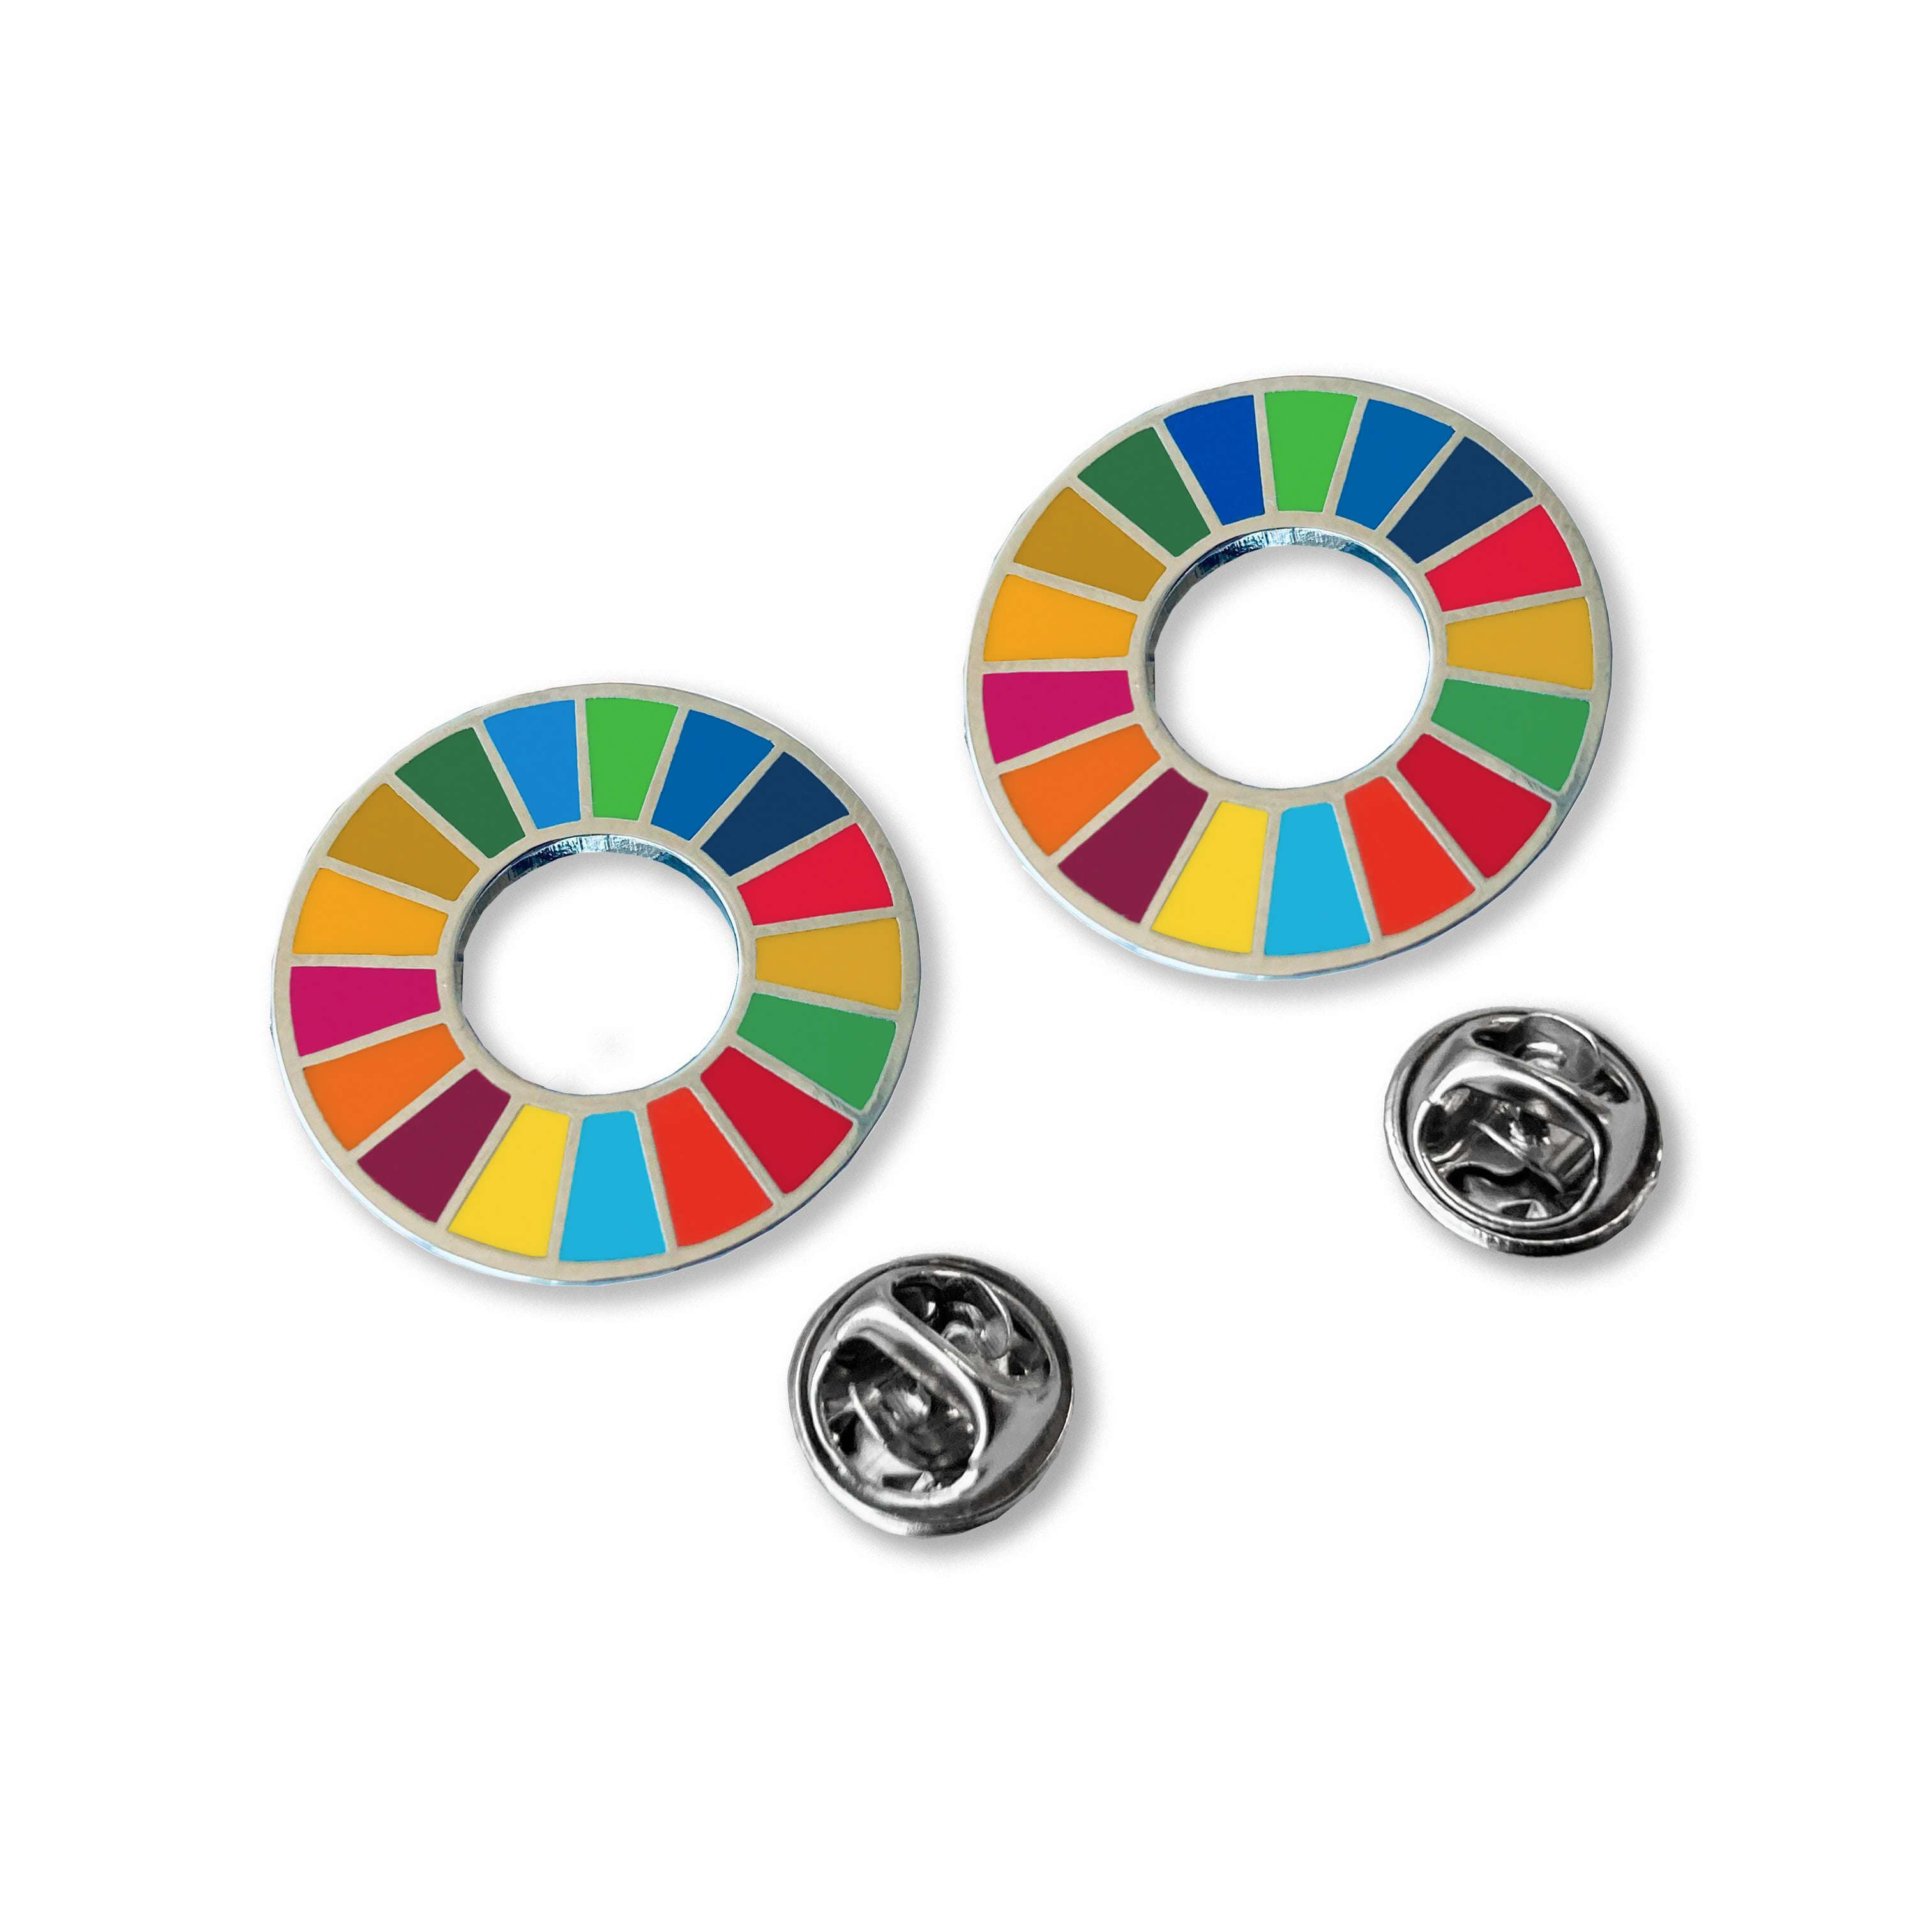 Buy Official SDGs Lapel Pins Online (set of two)